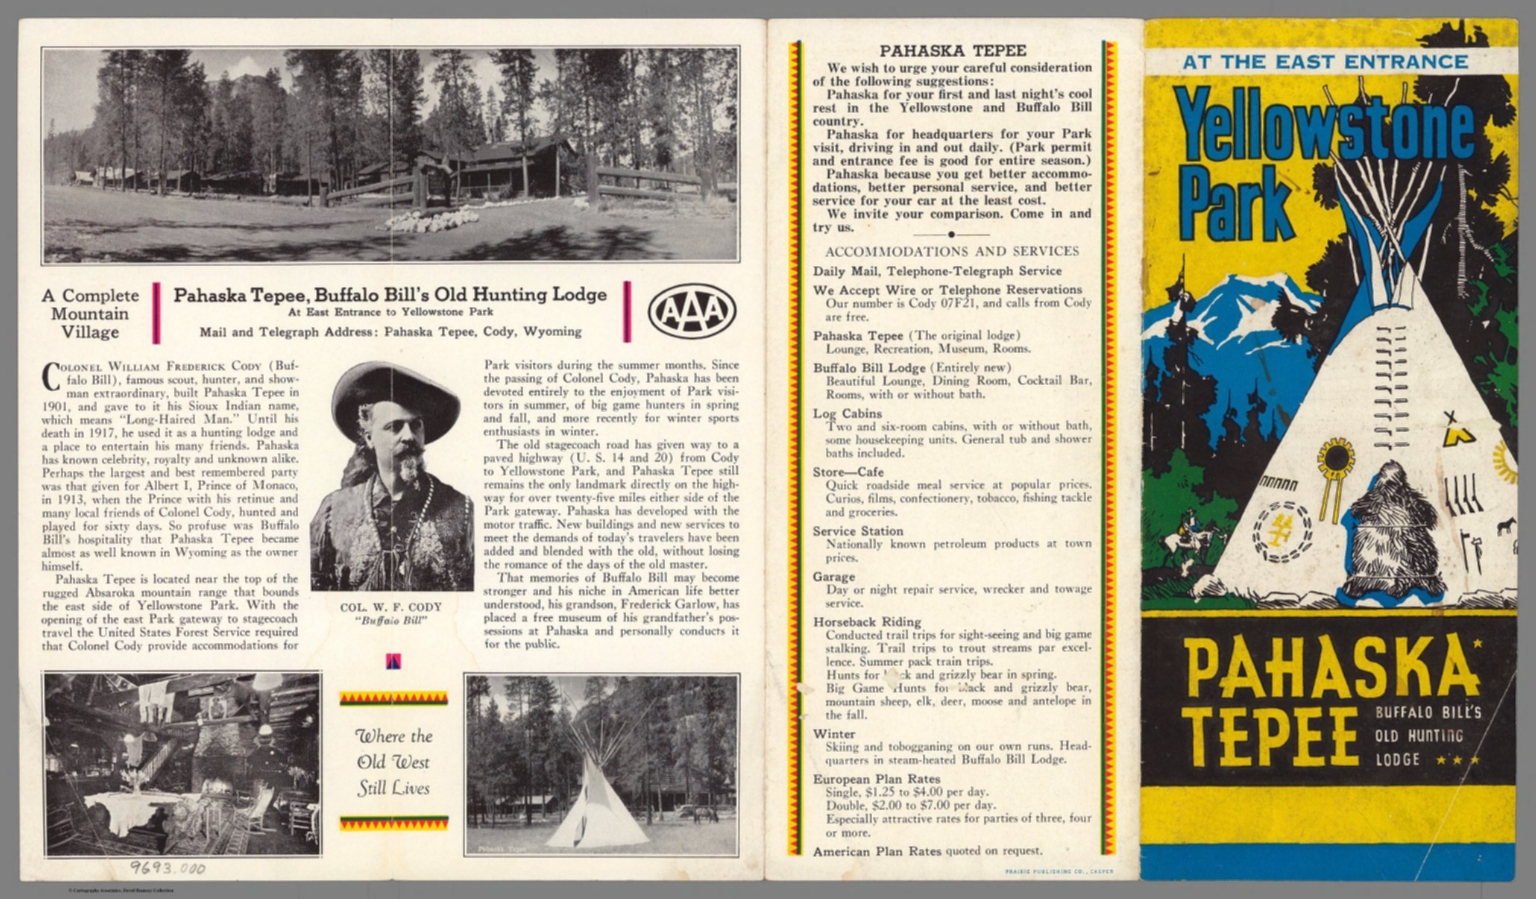 Covers: Pahaska Tepee, Buffalo Bill's Old Hunting Lodge. At the East Entrance, Yellowstone Park. - David Rumsey Map Collection